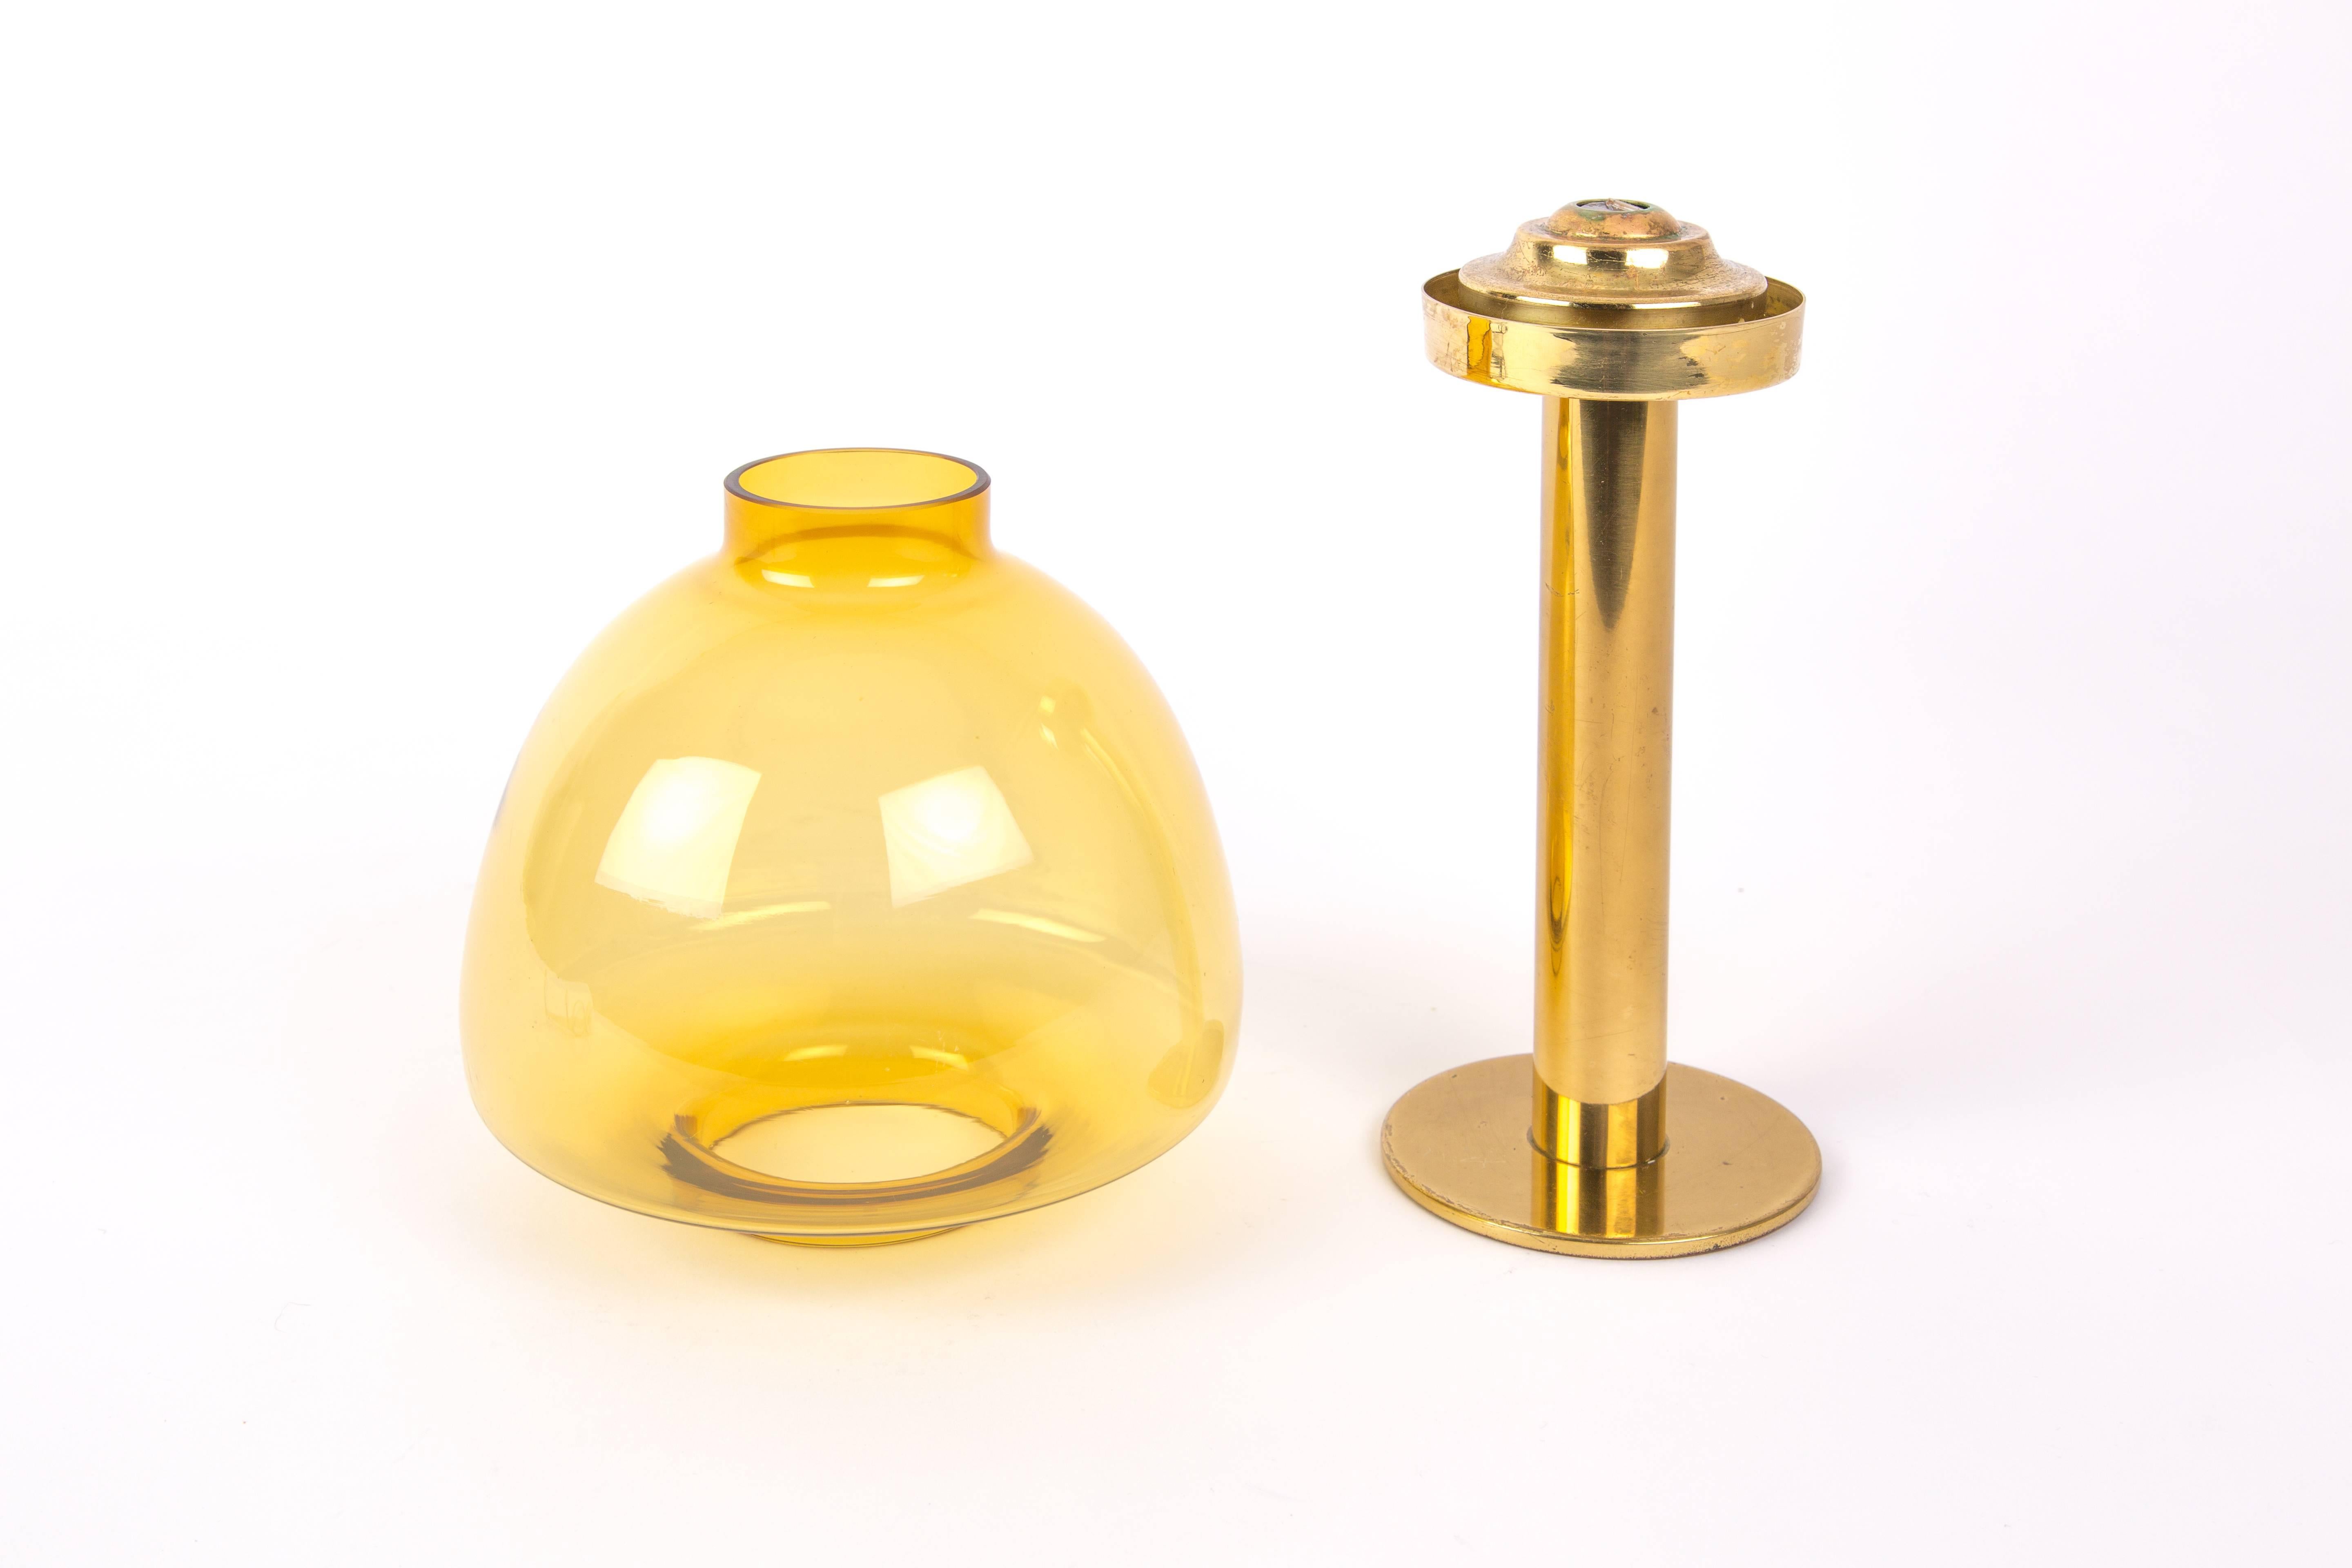 Hans Agne Jakobsson. Brass candleholder of Hans-Agne Jakobsson for Markaryd, Sweden. Gold-yellow glass. System with a spring for the candle.
Measures: Diameter base is 10cm, diameter glass bulb is 17cm and the height is 34.5cm.